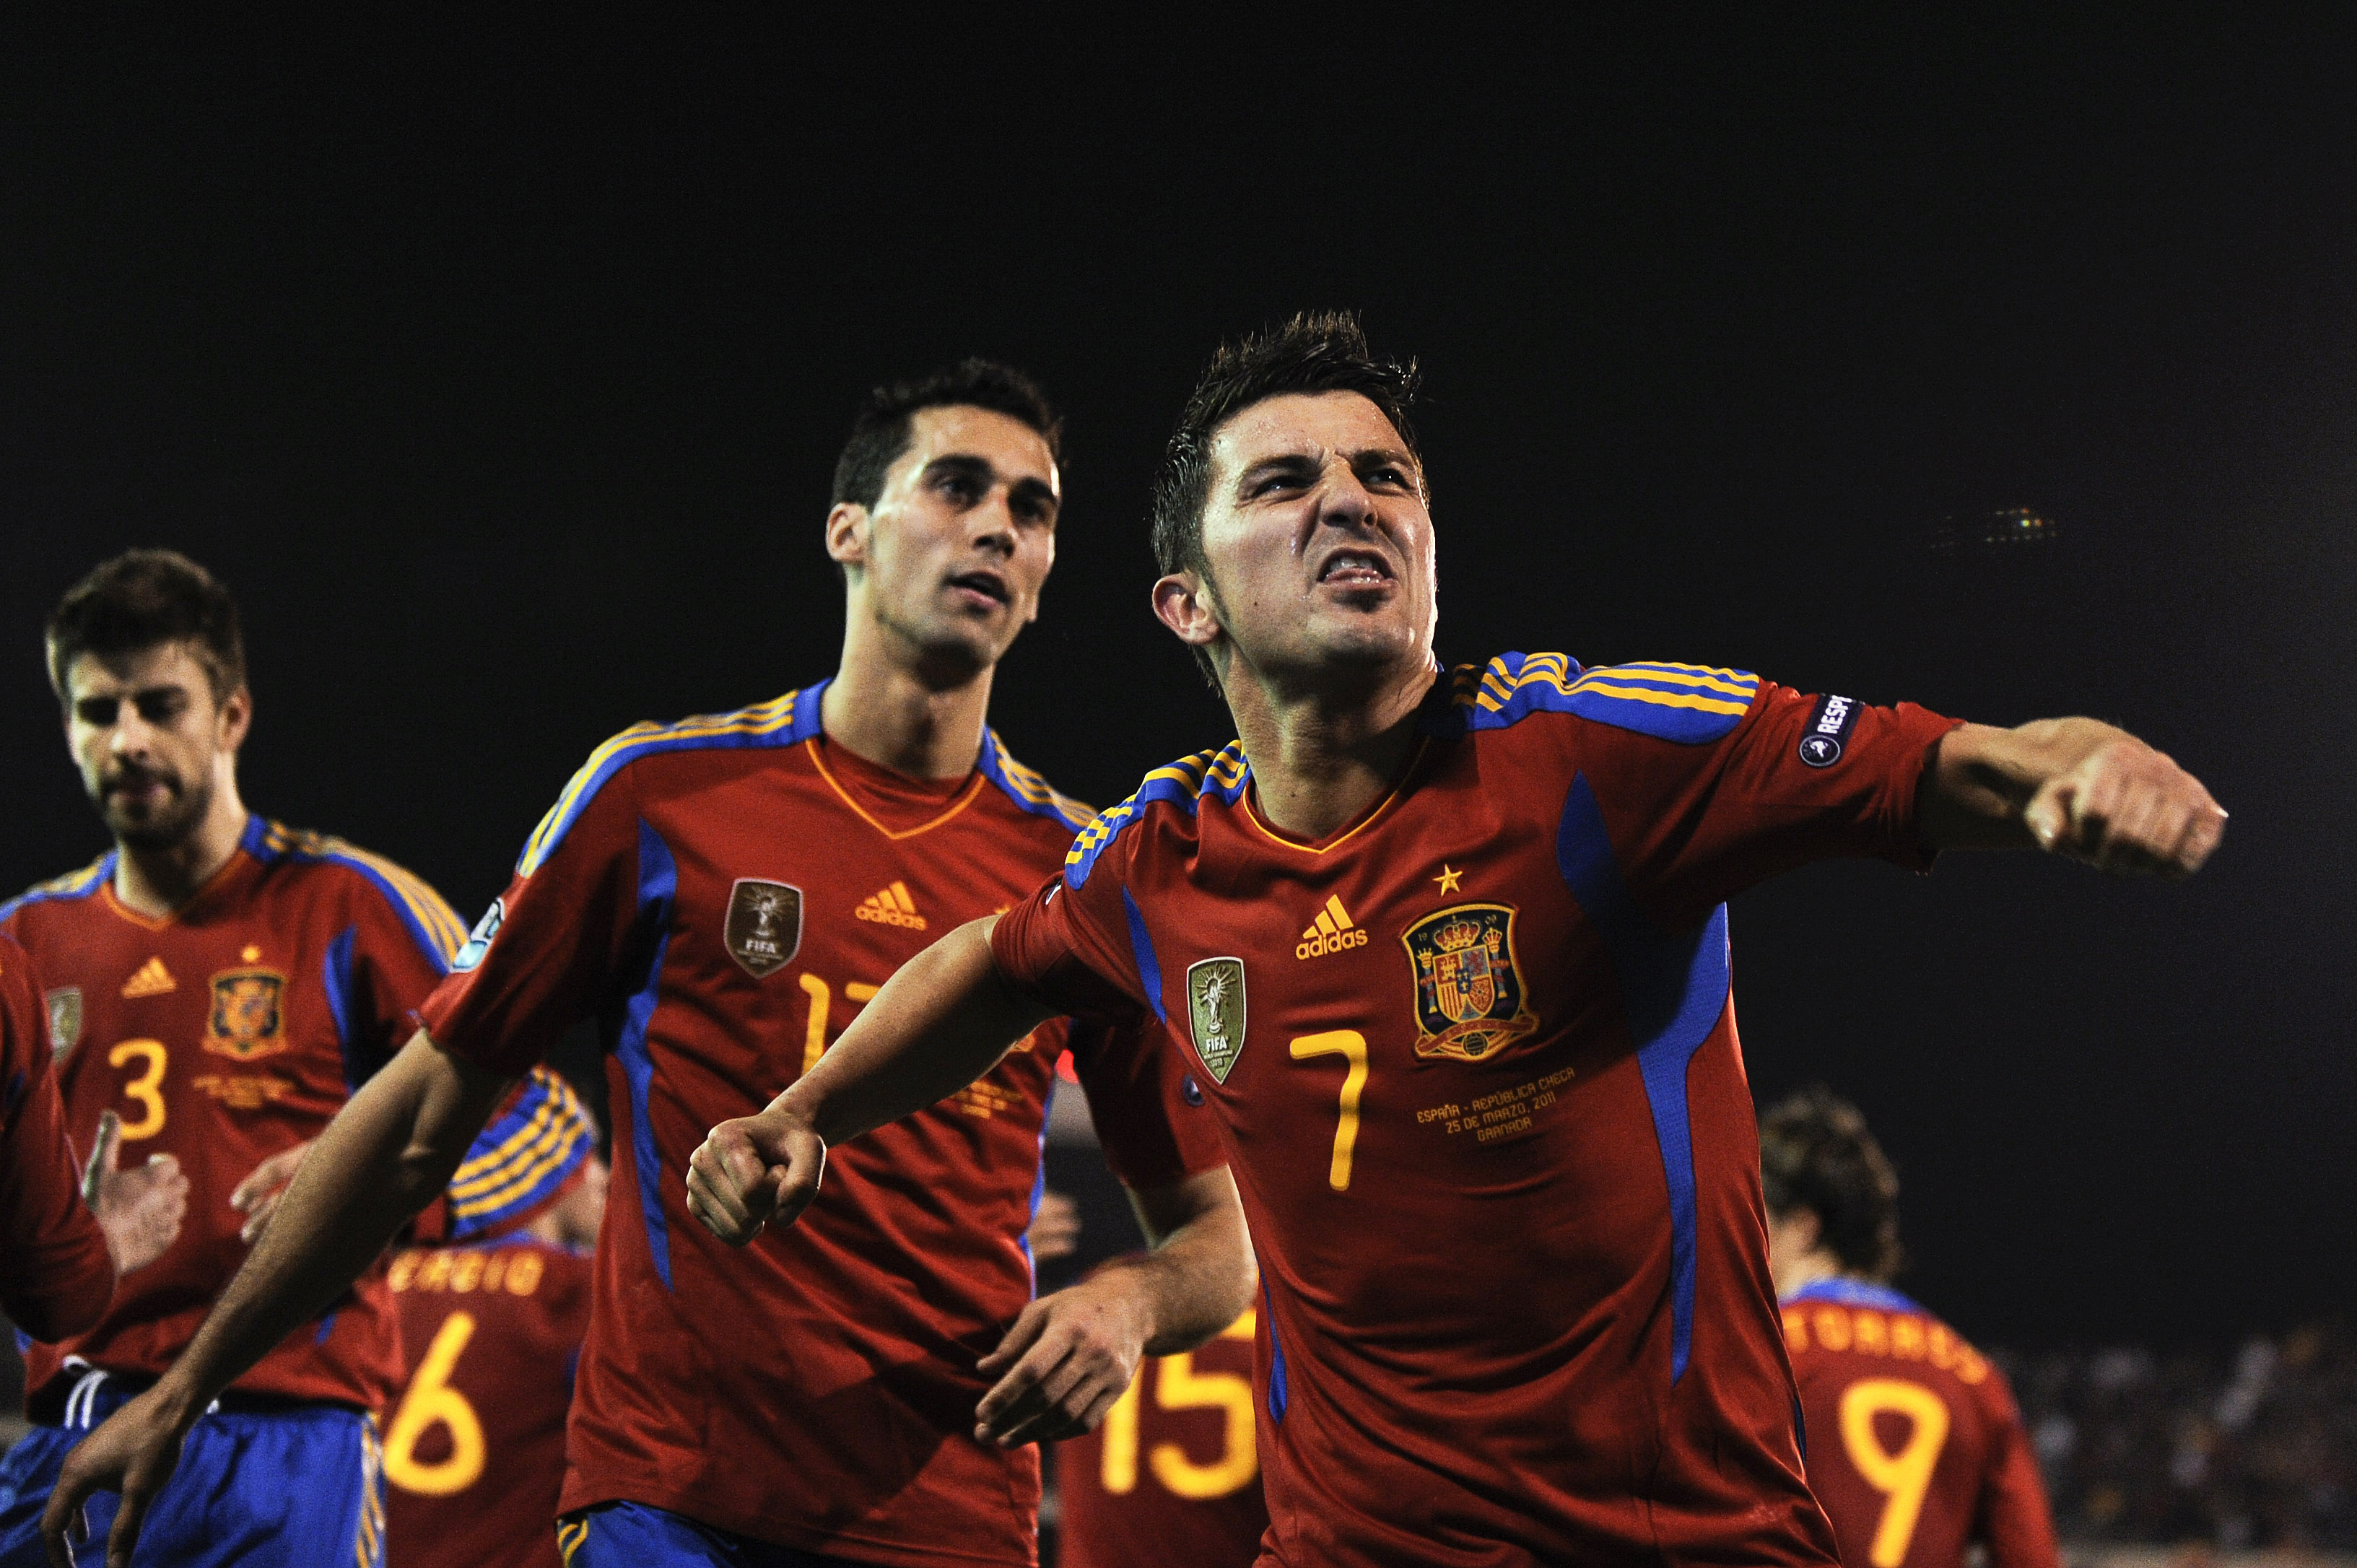 GRANADA, SPAIN - MARCH 25:  David Villa (R) of Spain celebrates after scoring his second goal during the UEFA EURO 2012 qualifier between Spain and Czech Republic at Los Carmenes Stadium on March 25, 2011 in Granada, Spain.  Spain win 2-1. (Photo by David